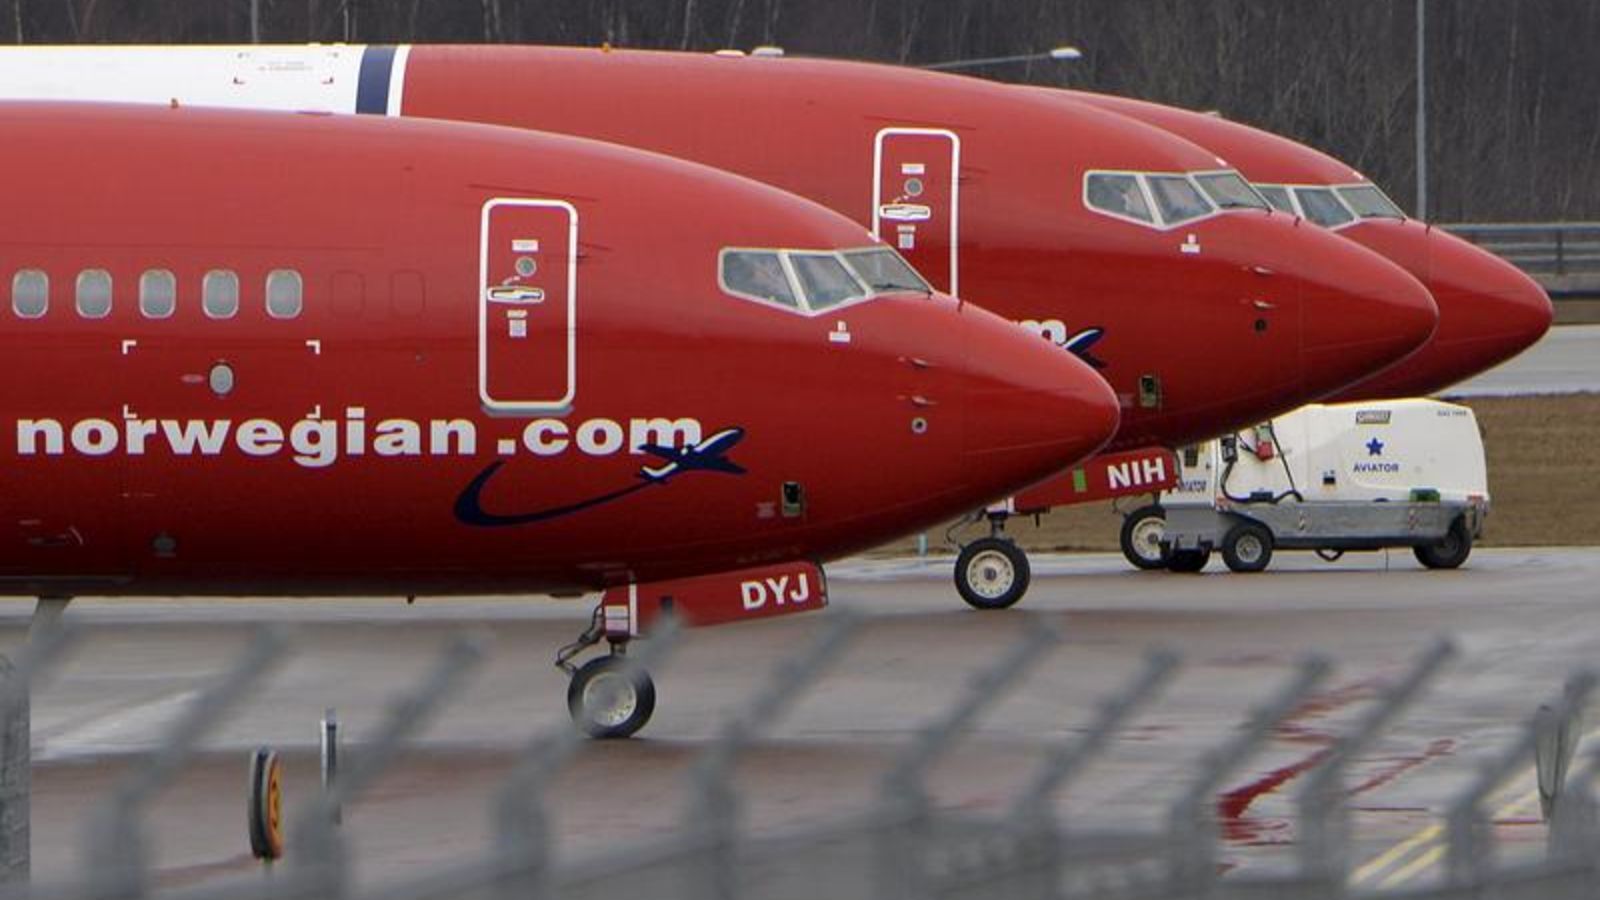 Illustration for article titled Norwegian Government will stop providing support to Norwegian Air